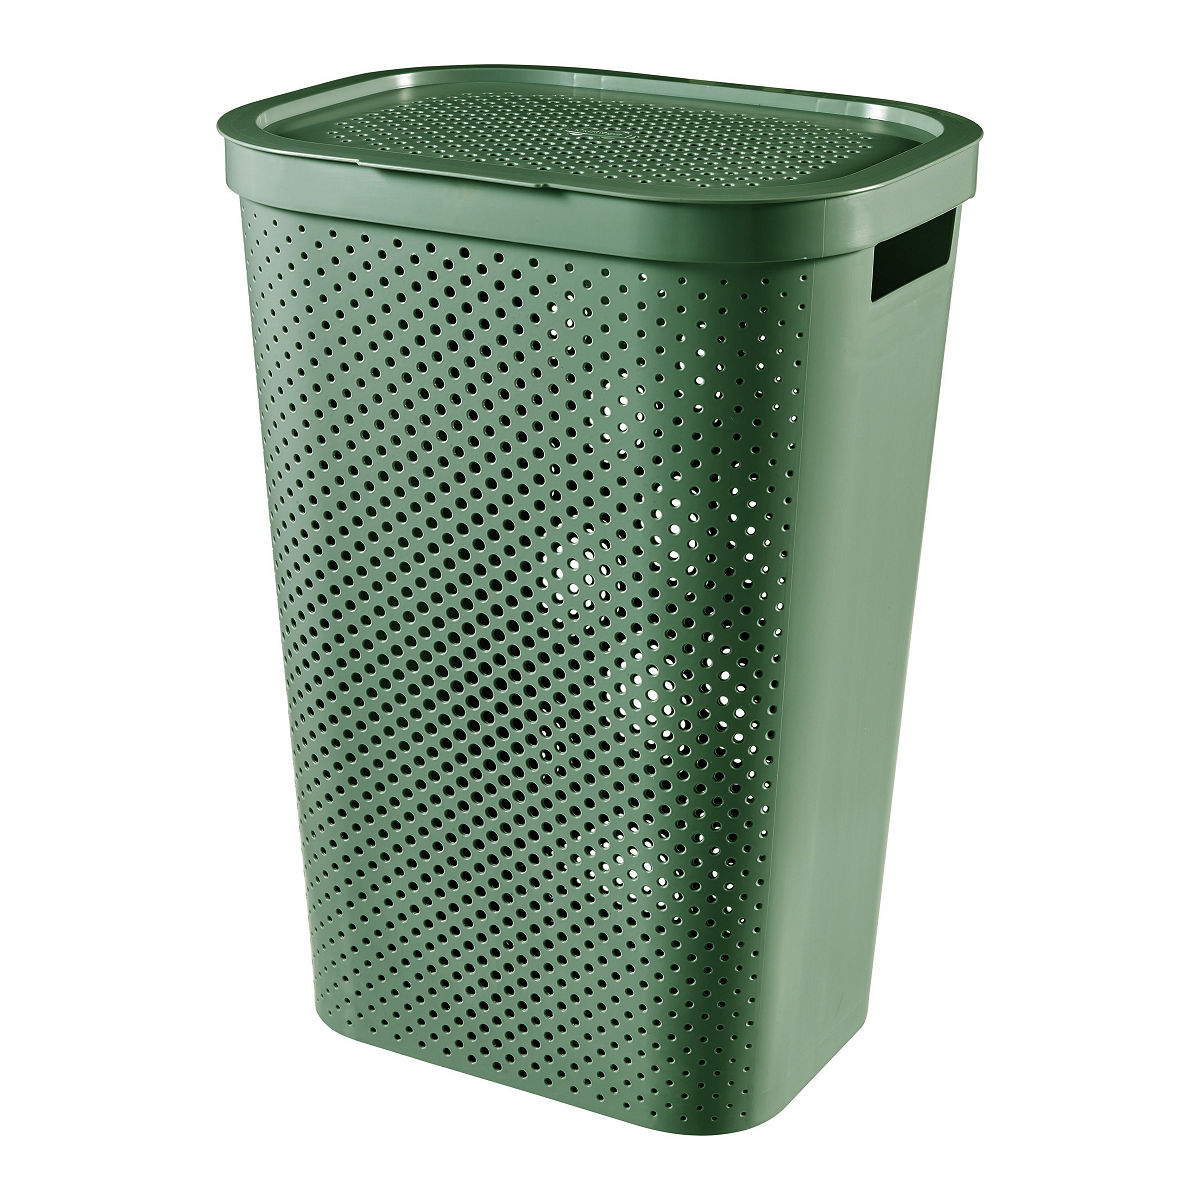 CURVER WASBOX 60 L GROEN DOTS RECYCLED - 3253924754185 - 529769